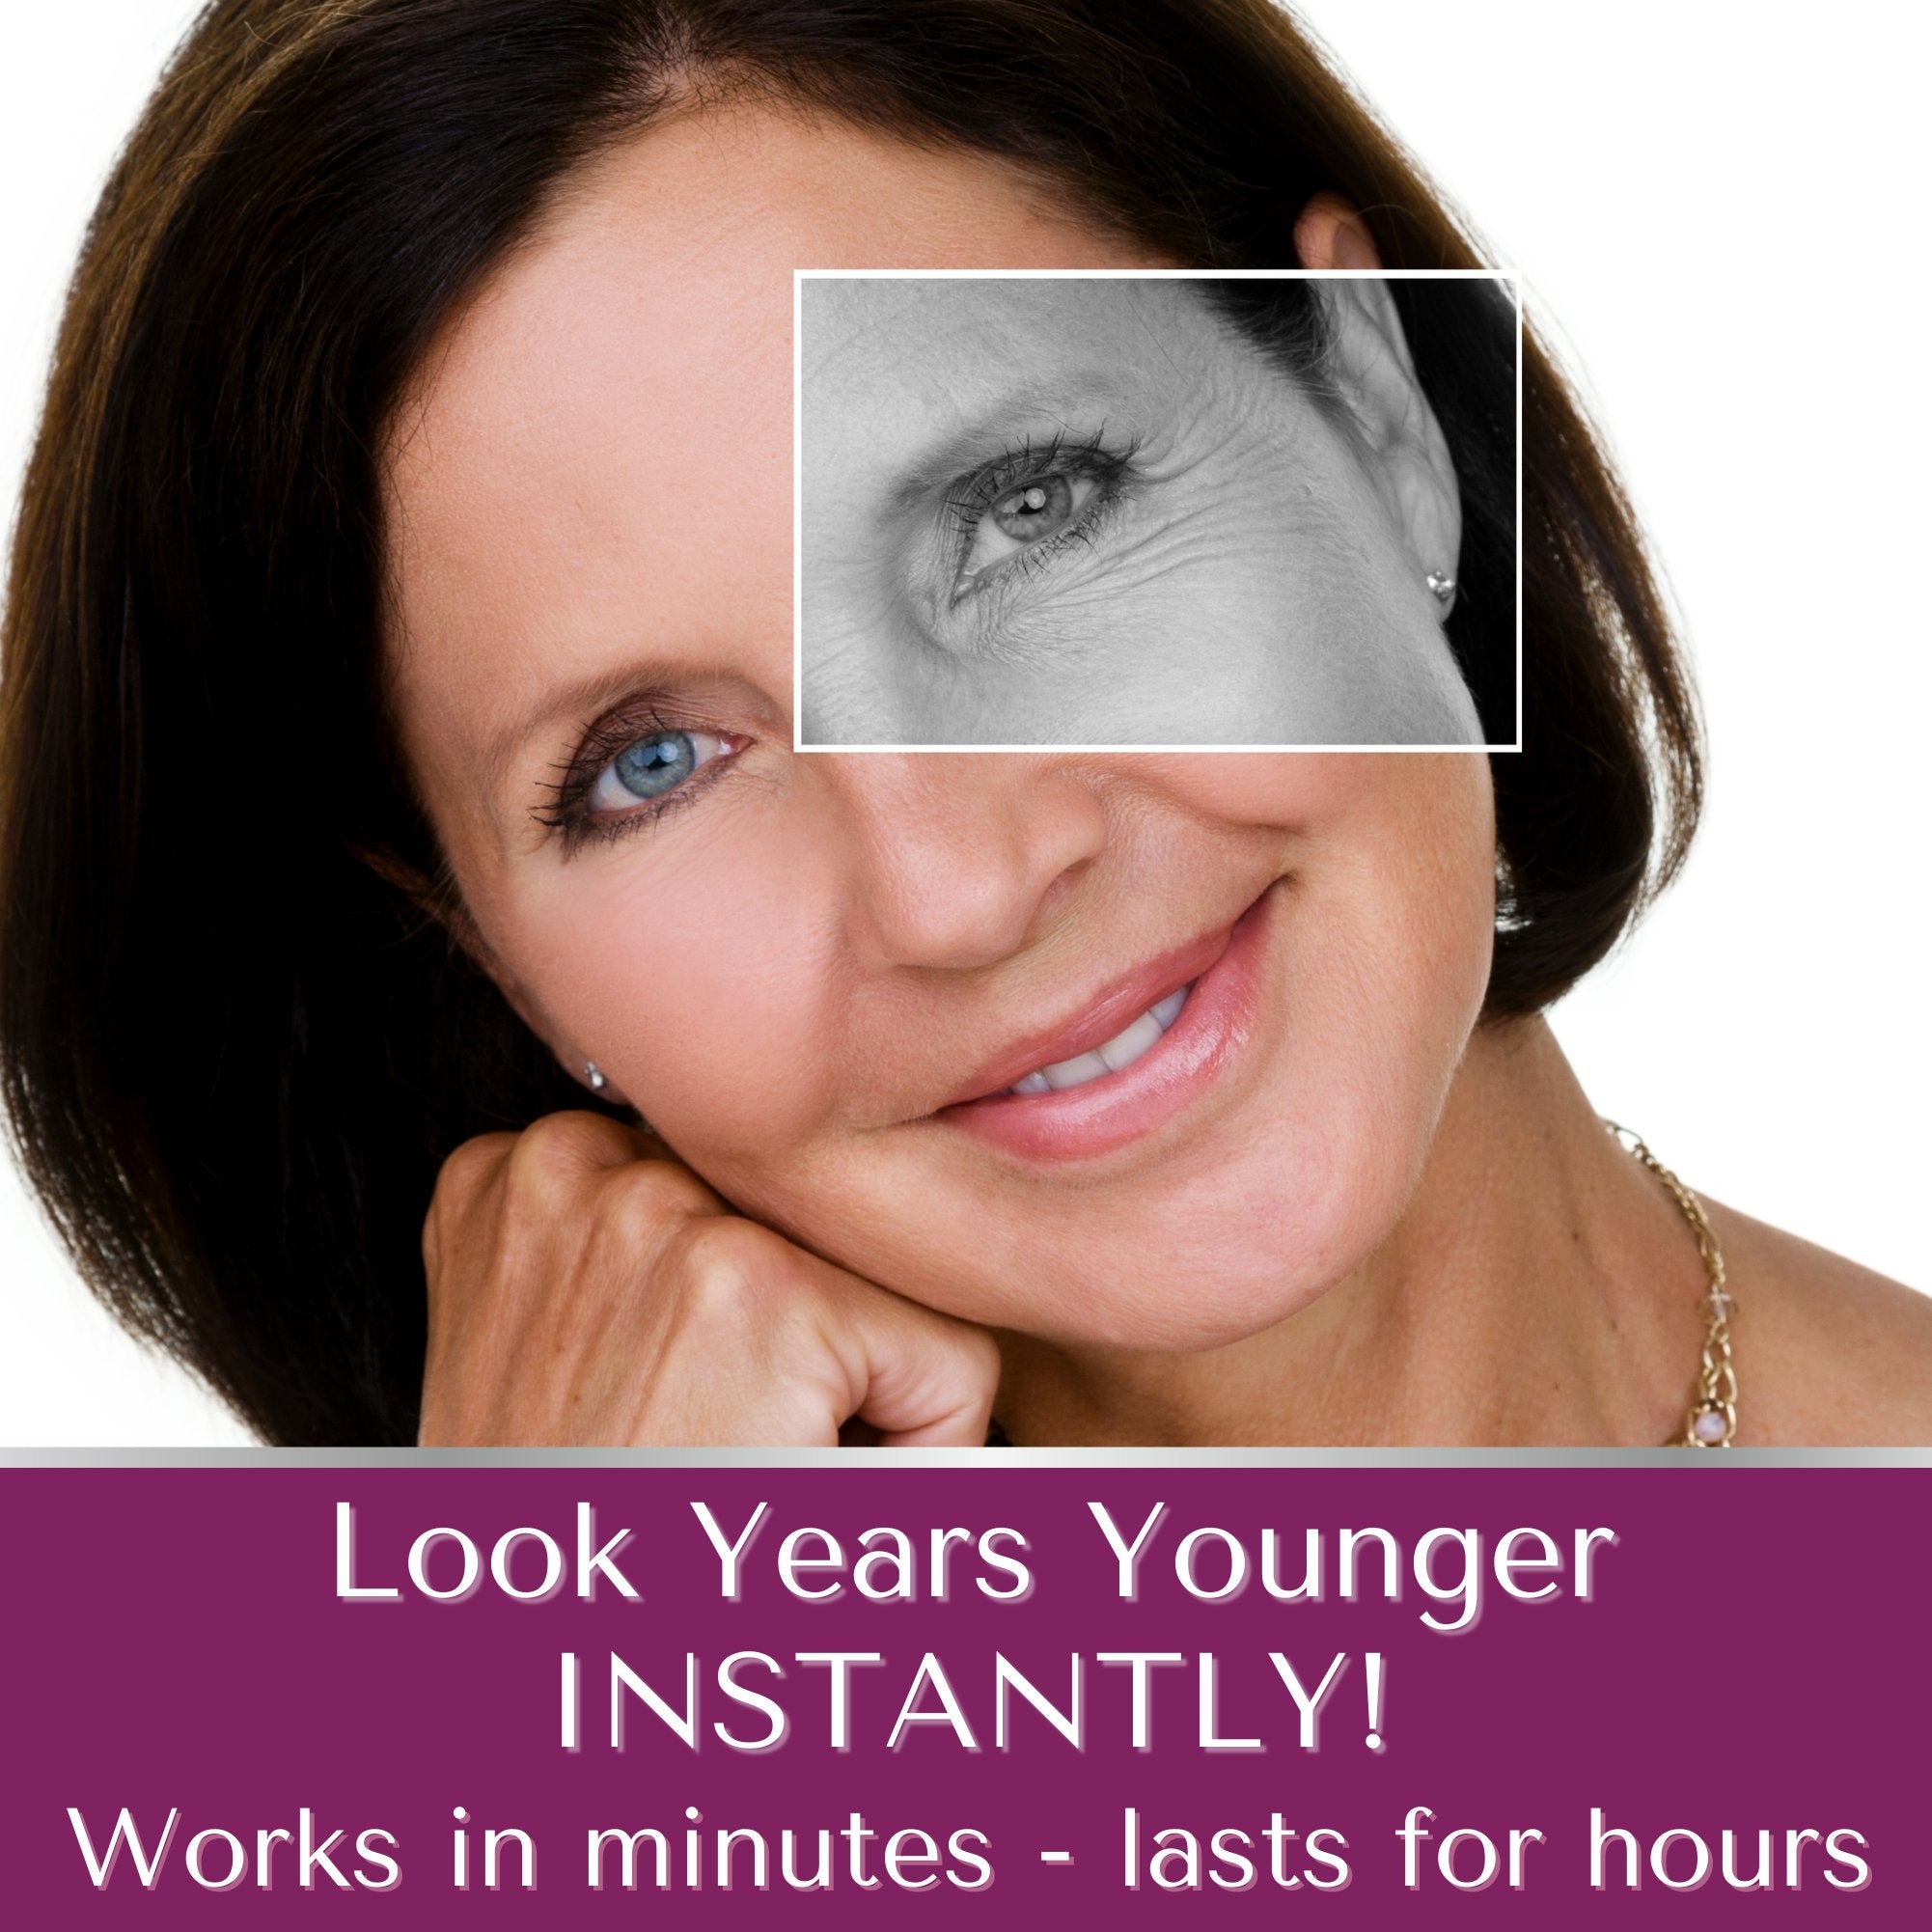 Look years younger, instantly. Dermaworks Immaculift instant eye lift serum works in minutes and lasts for hours.